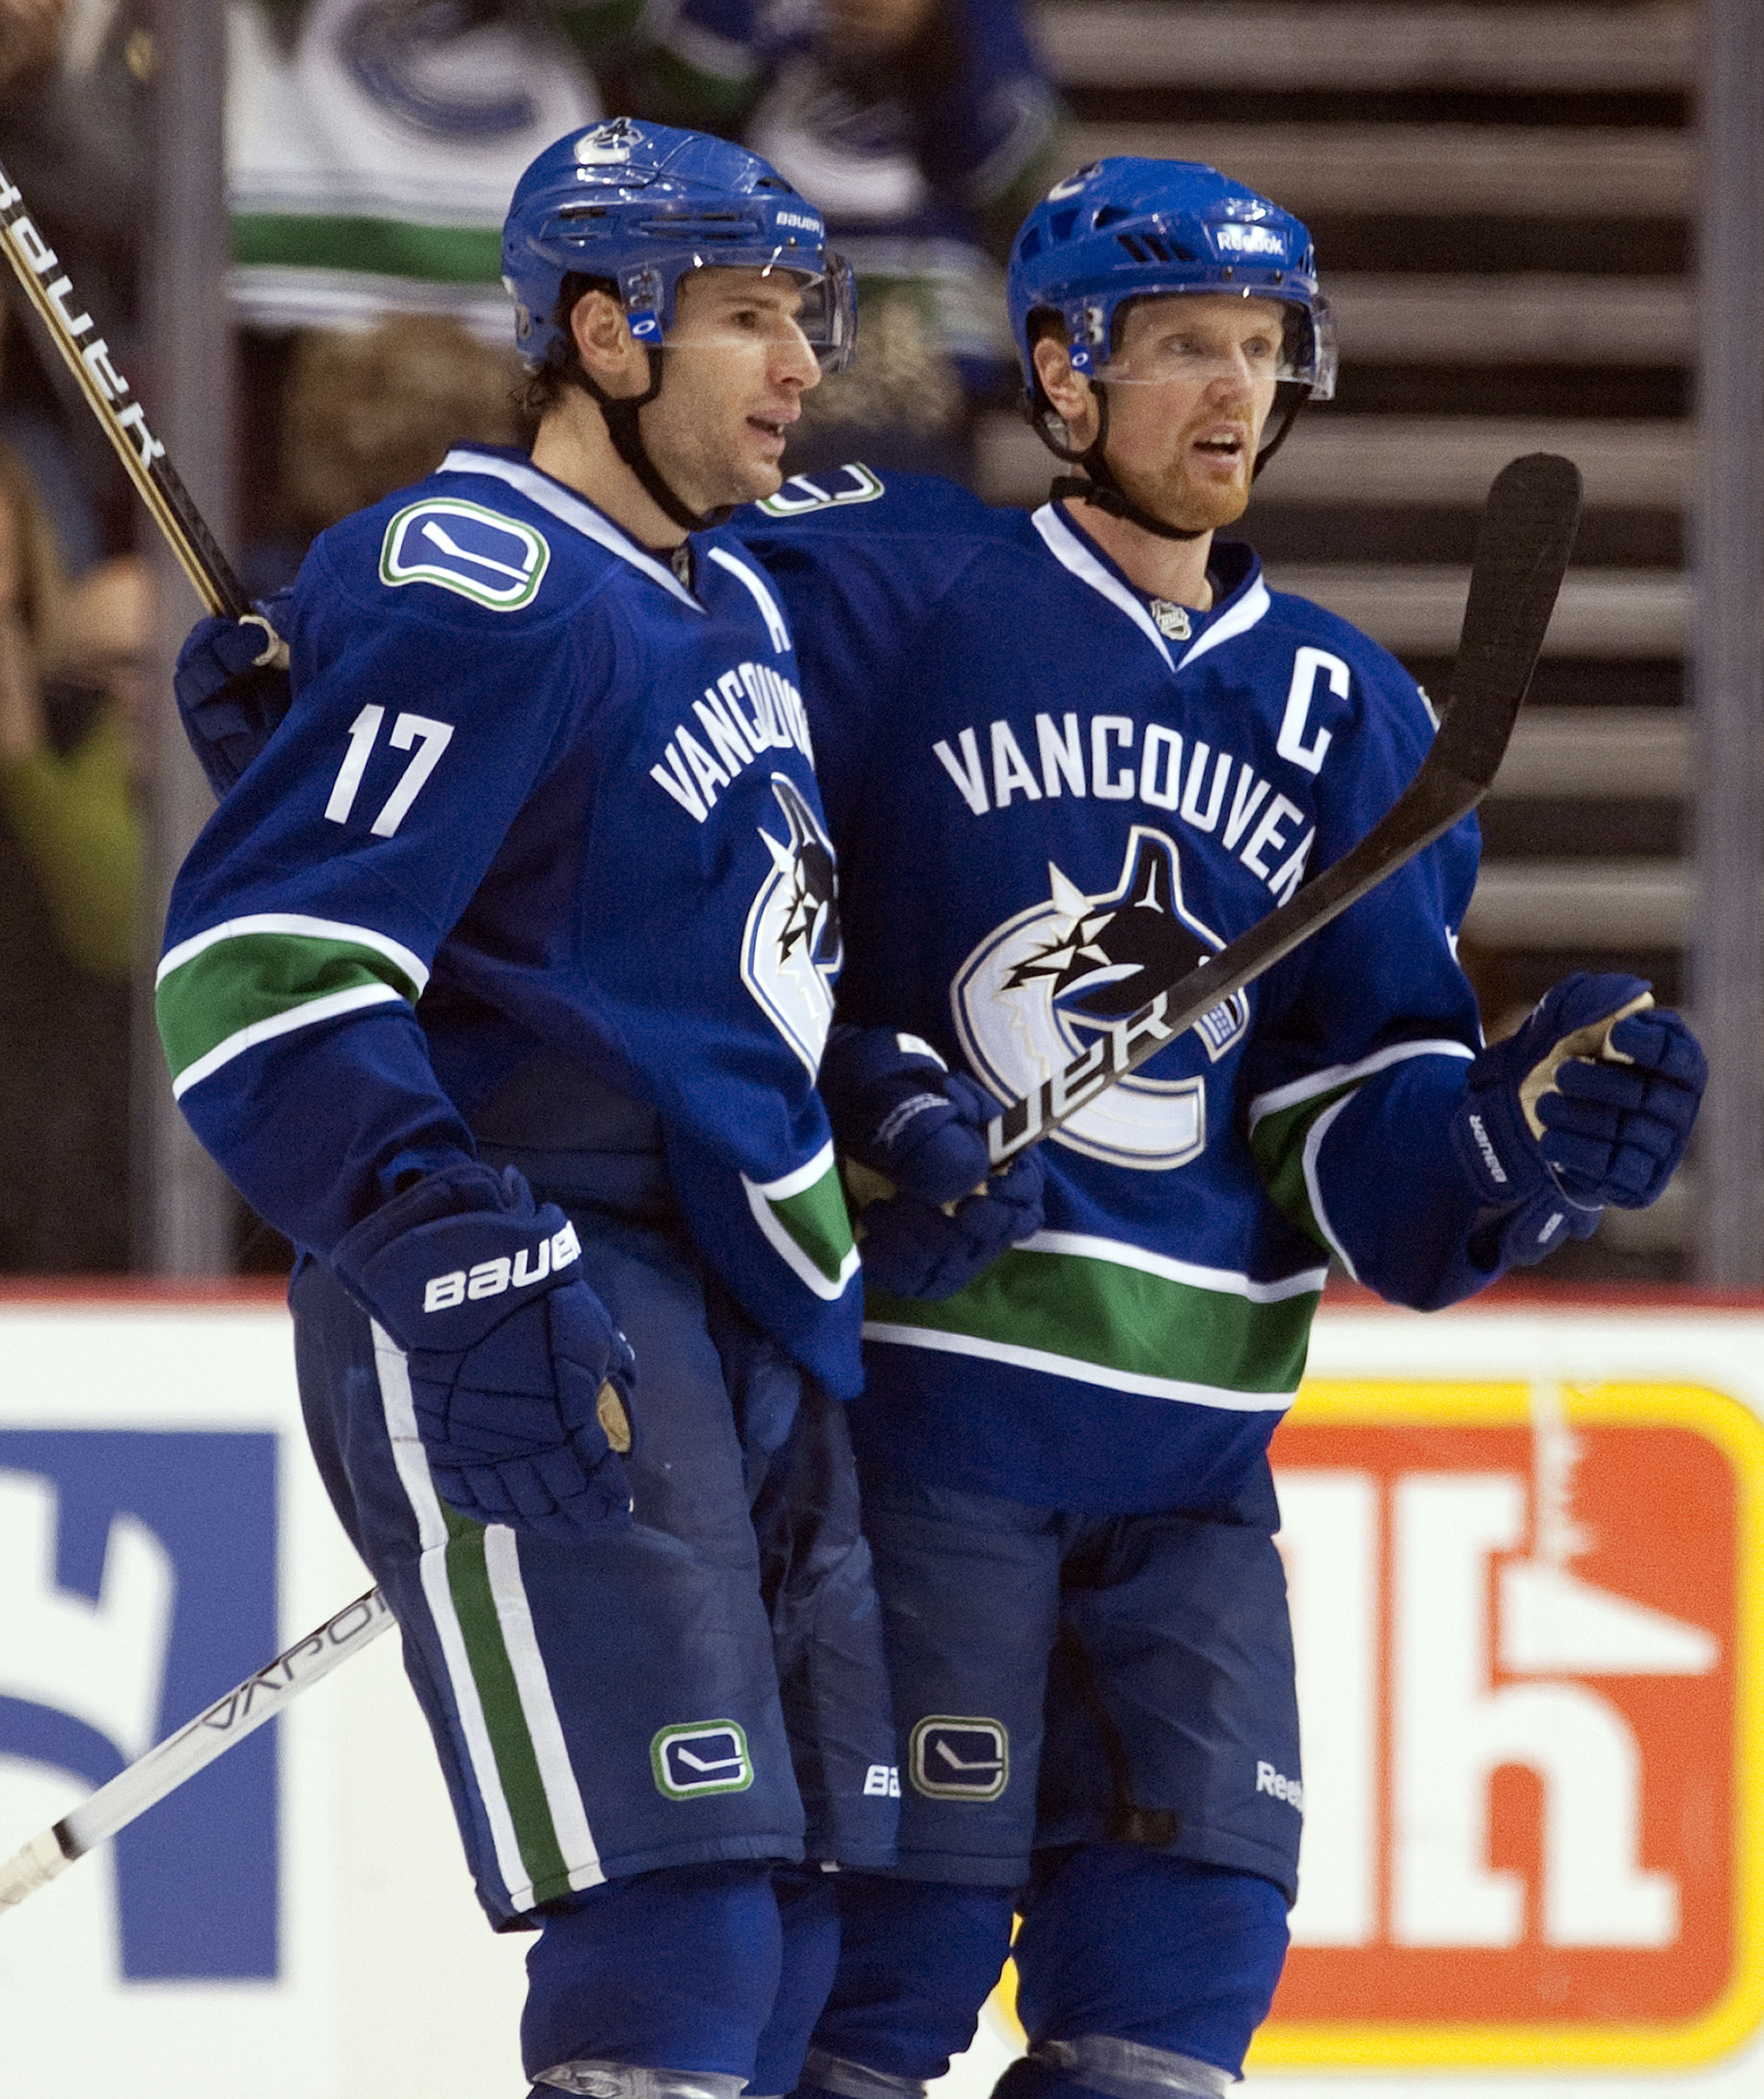 Hits, misses, trends: Analyzing 6 years of Canucks drafts in the